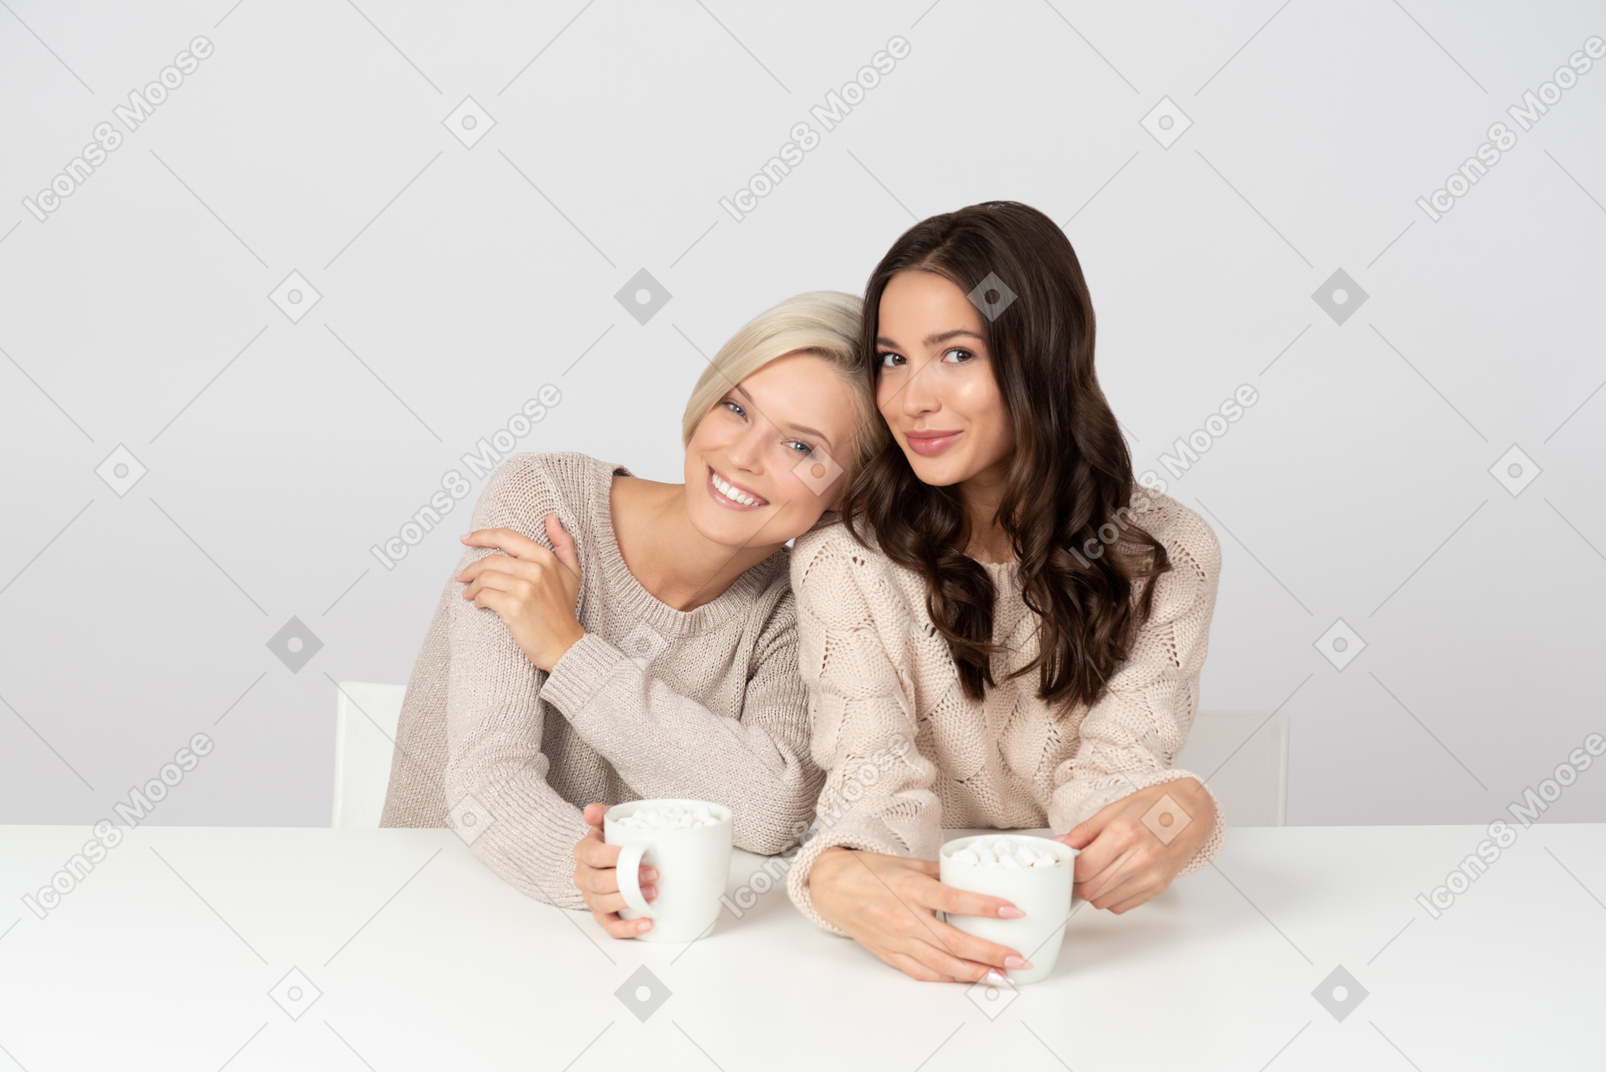 Women embracing and drinking coffee